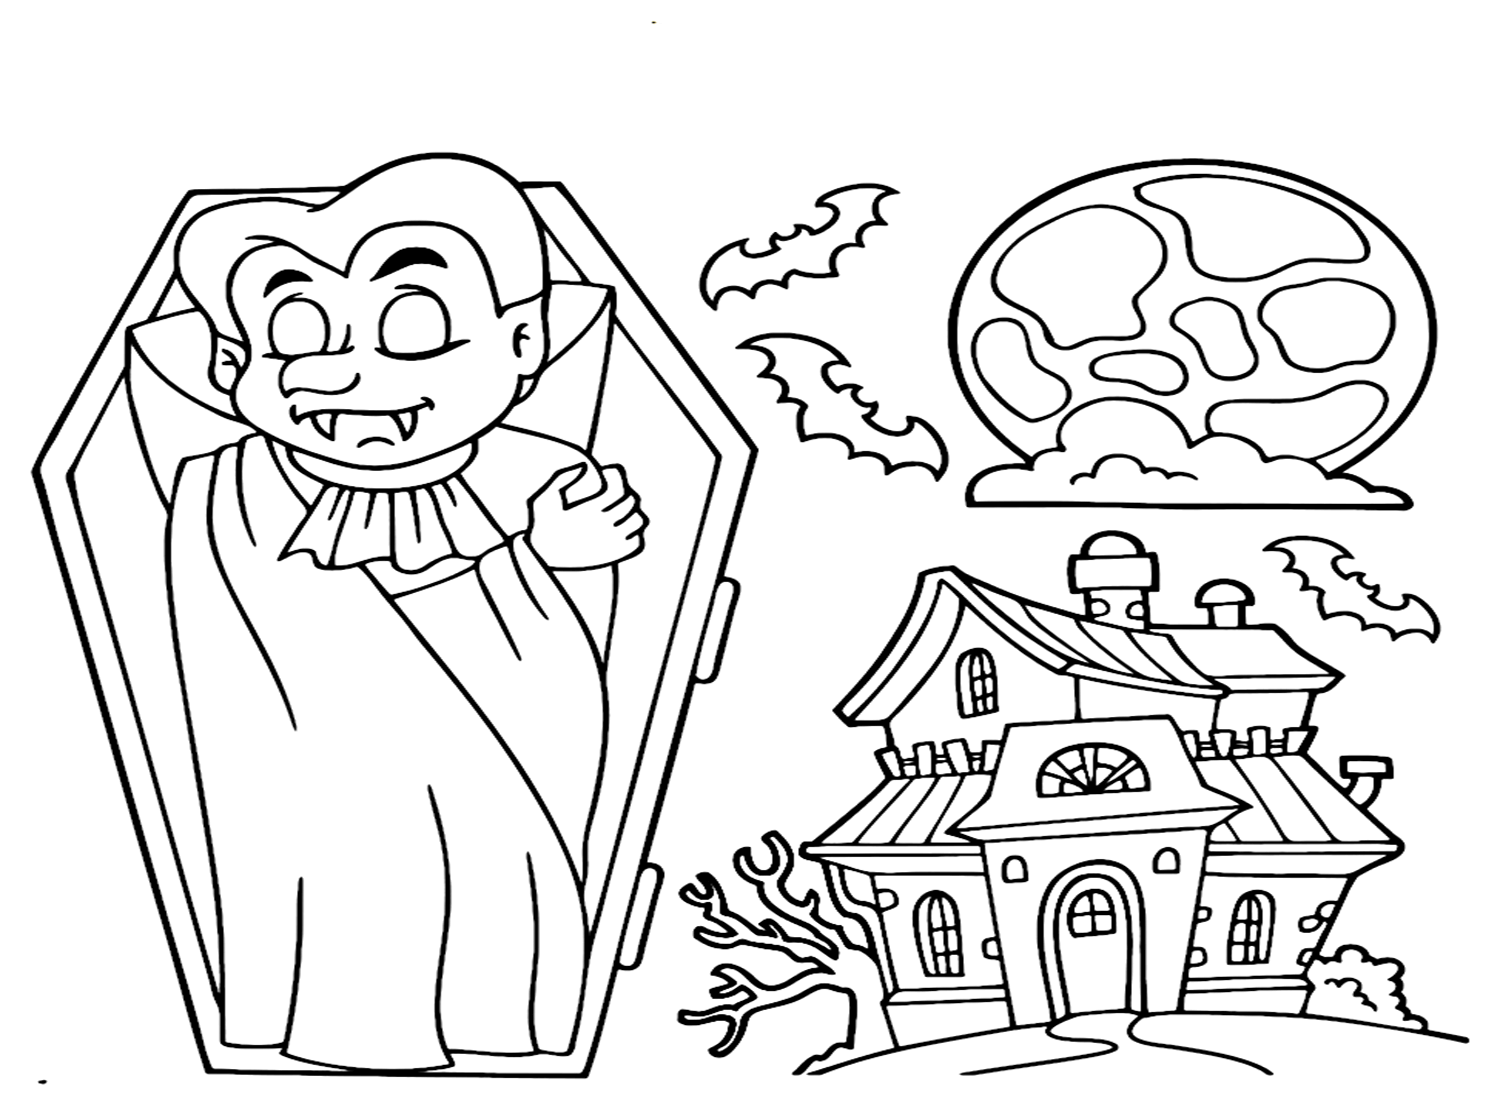 Coloring Pages Vampire - Free Printable Coloring Pages